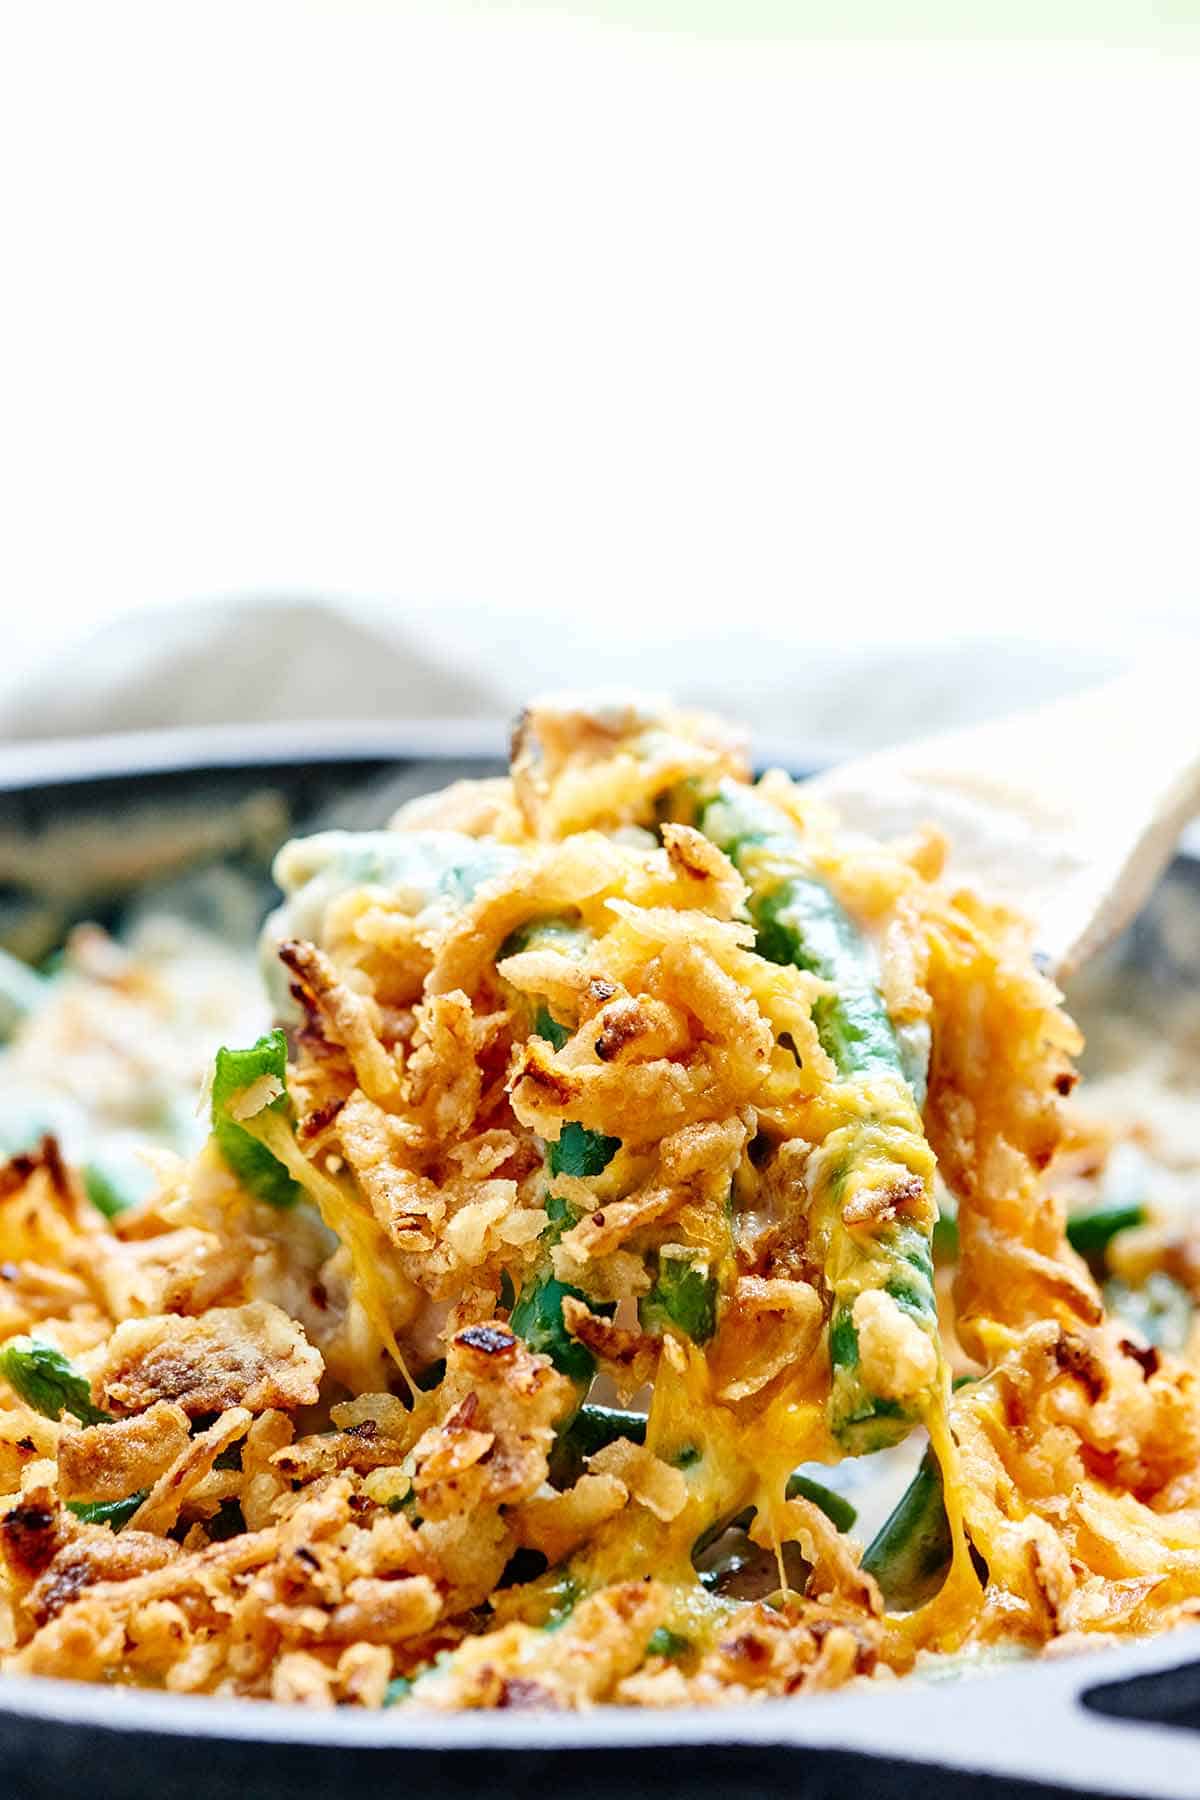 Green bean casserole scooped out of skillet with wooden spoon